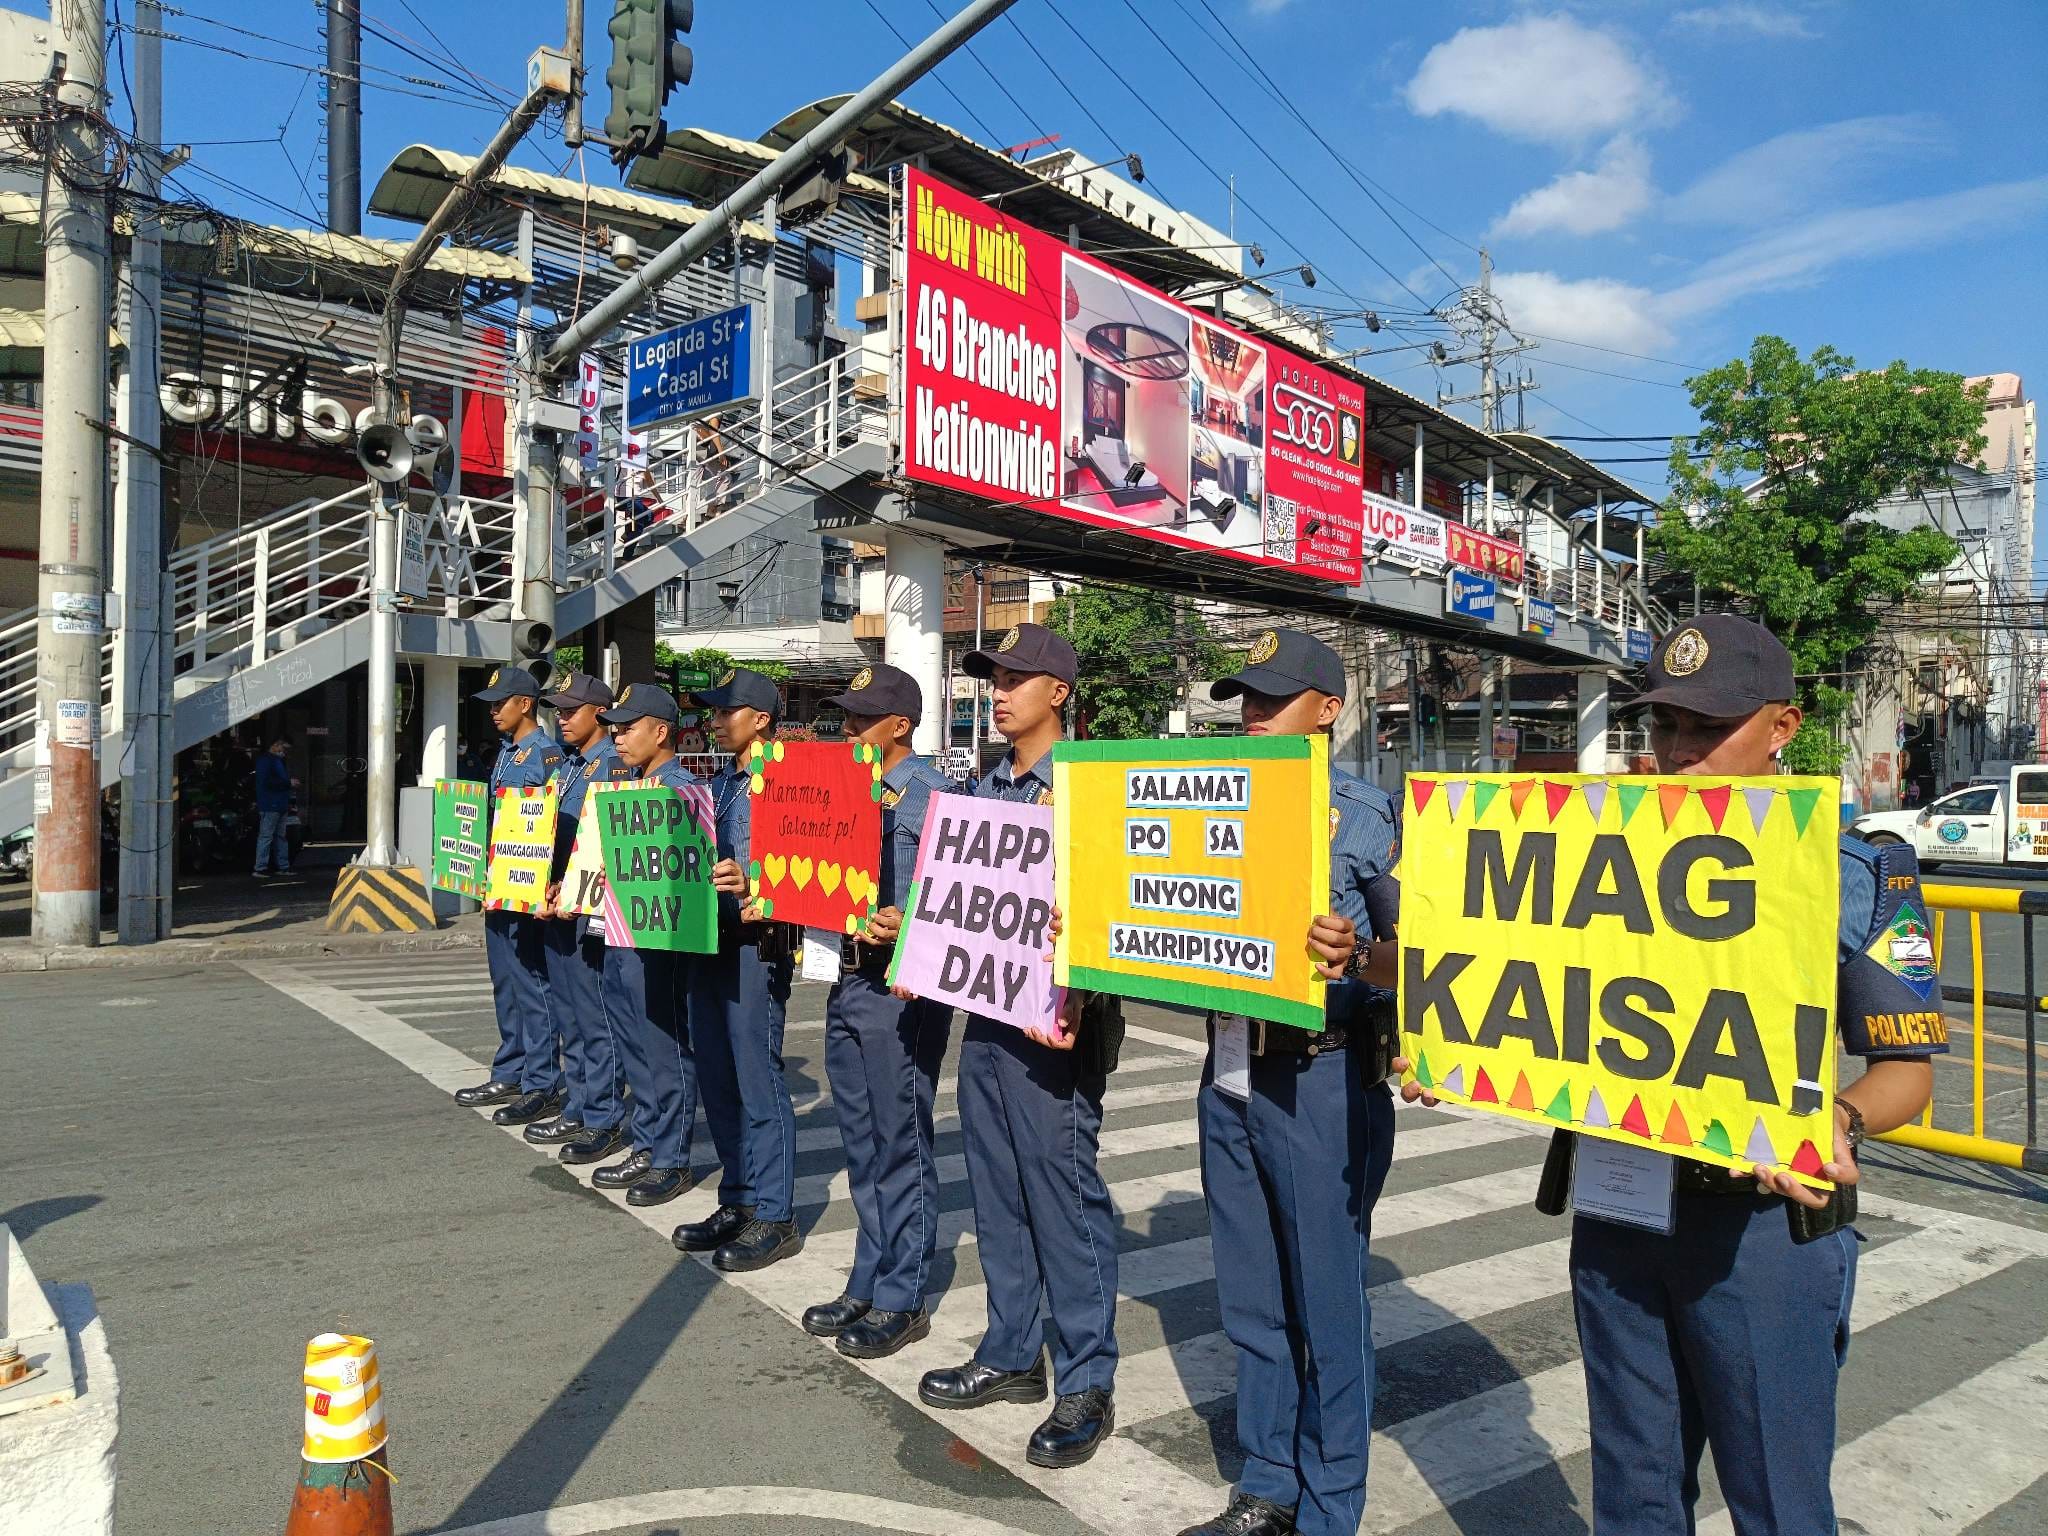 Manila police express solidarity with Labor Day protesters